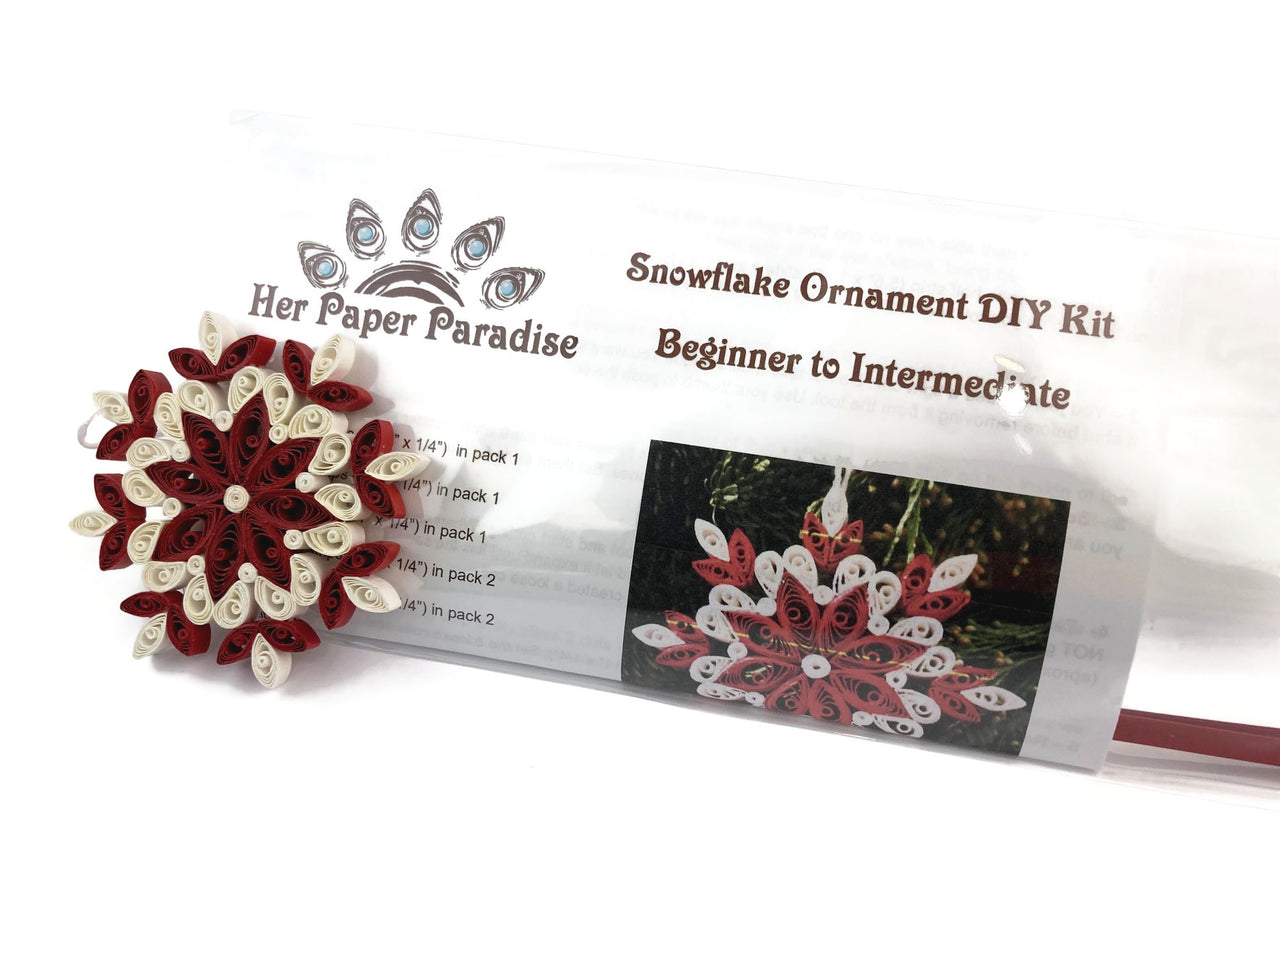 Quilling Snowflake DIY kit with step-by-step tutorial by Her Paper Paradise